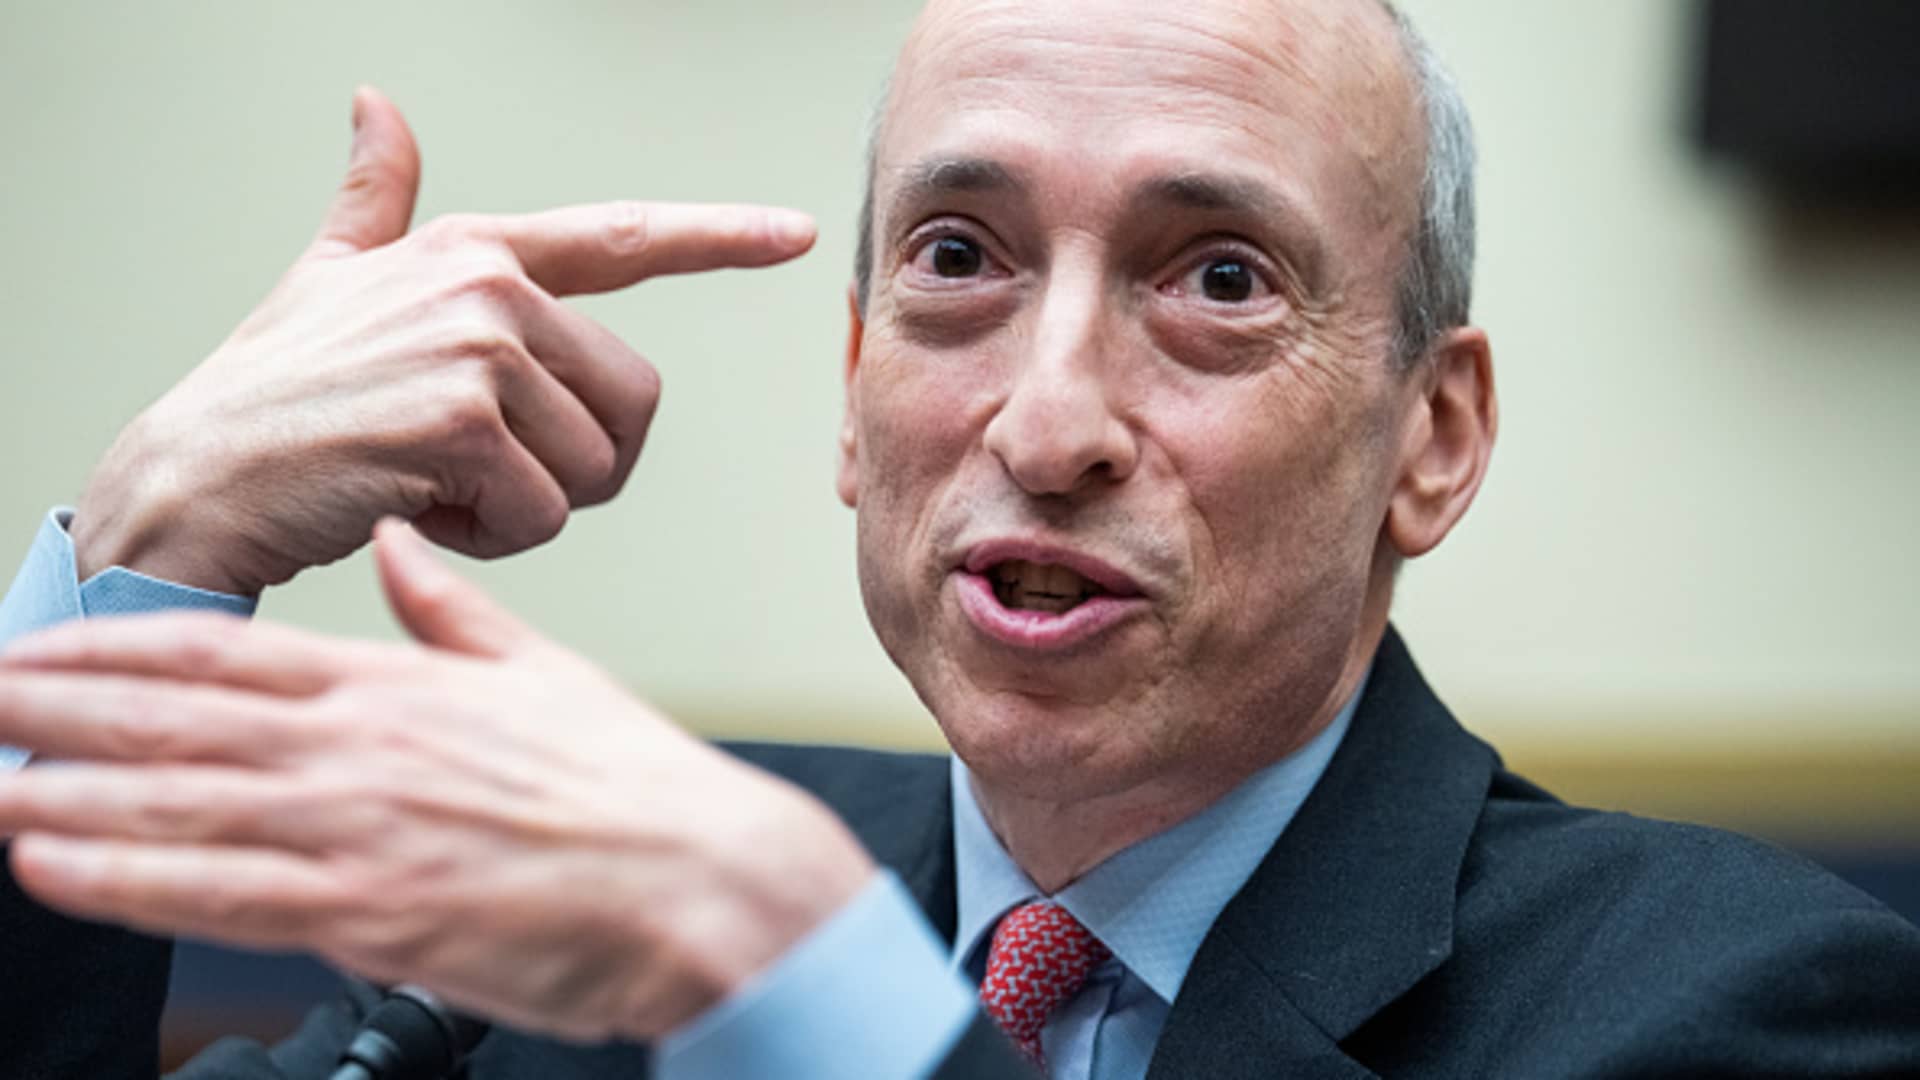 SEC’s Gensler says rebooted FTX is possible if done ‘within the law’